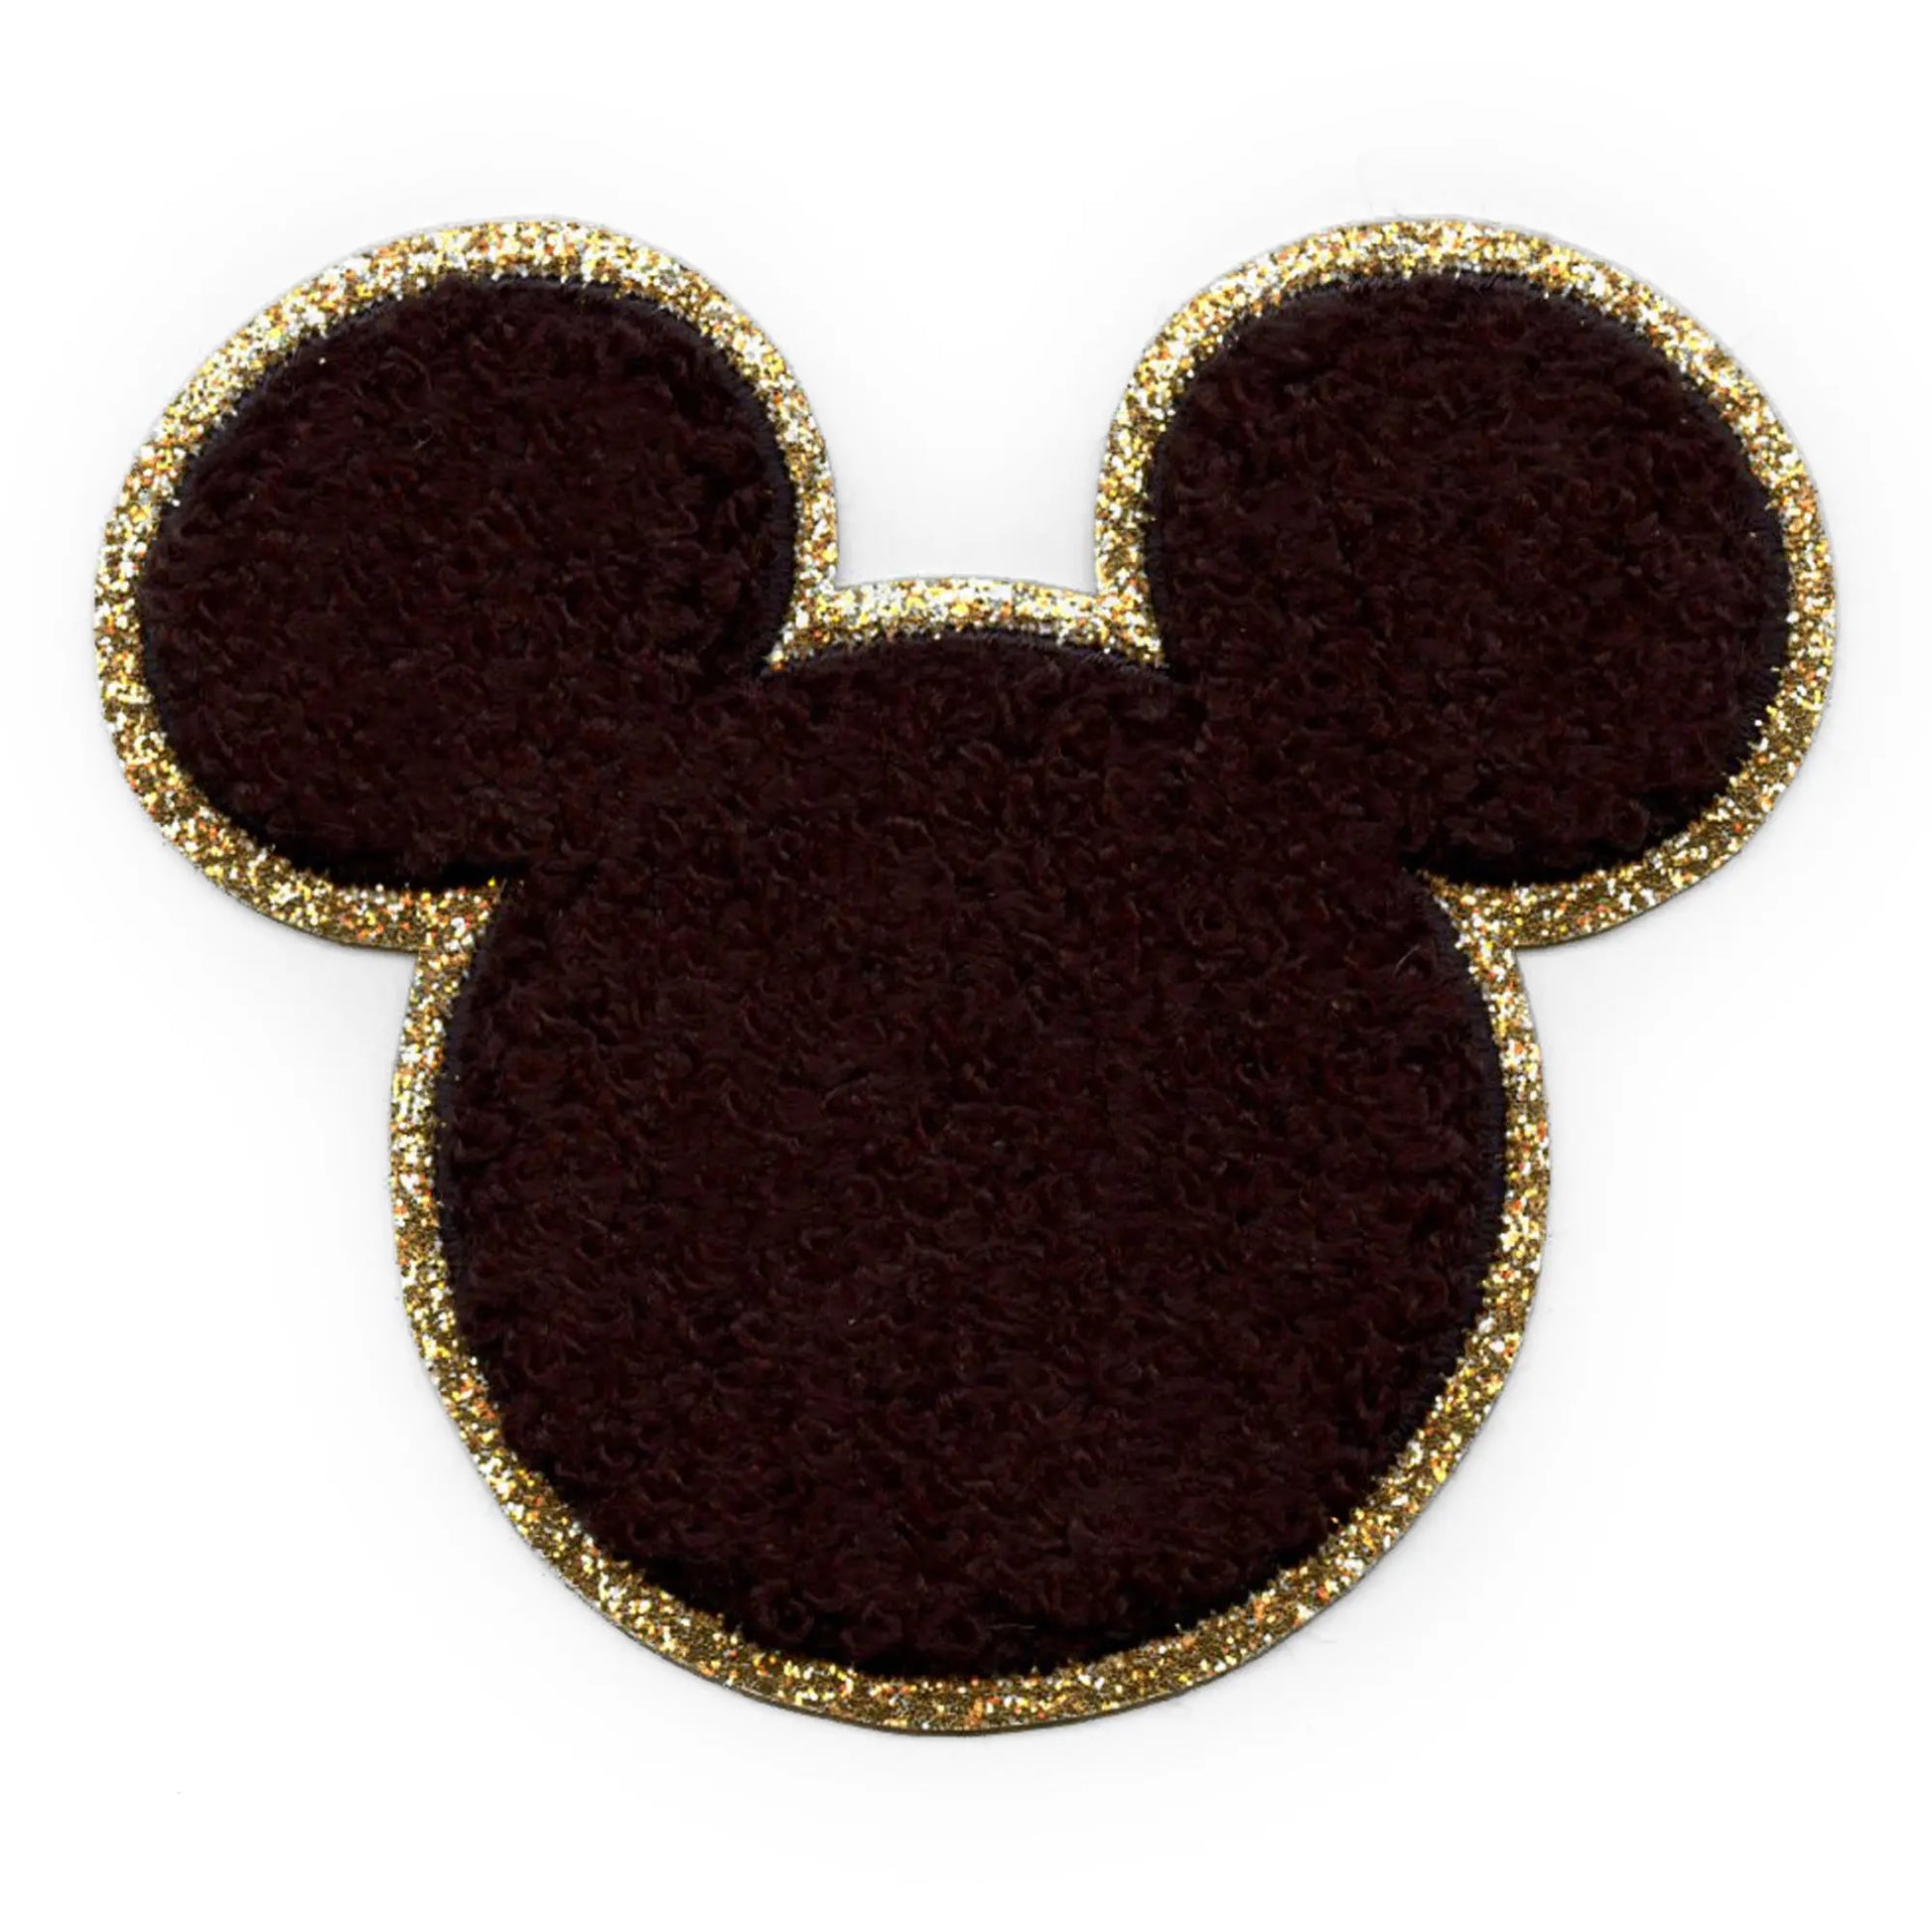 Large Sequin Mickey Mouse Patch, Disney Iron on Patch, Embroidery